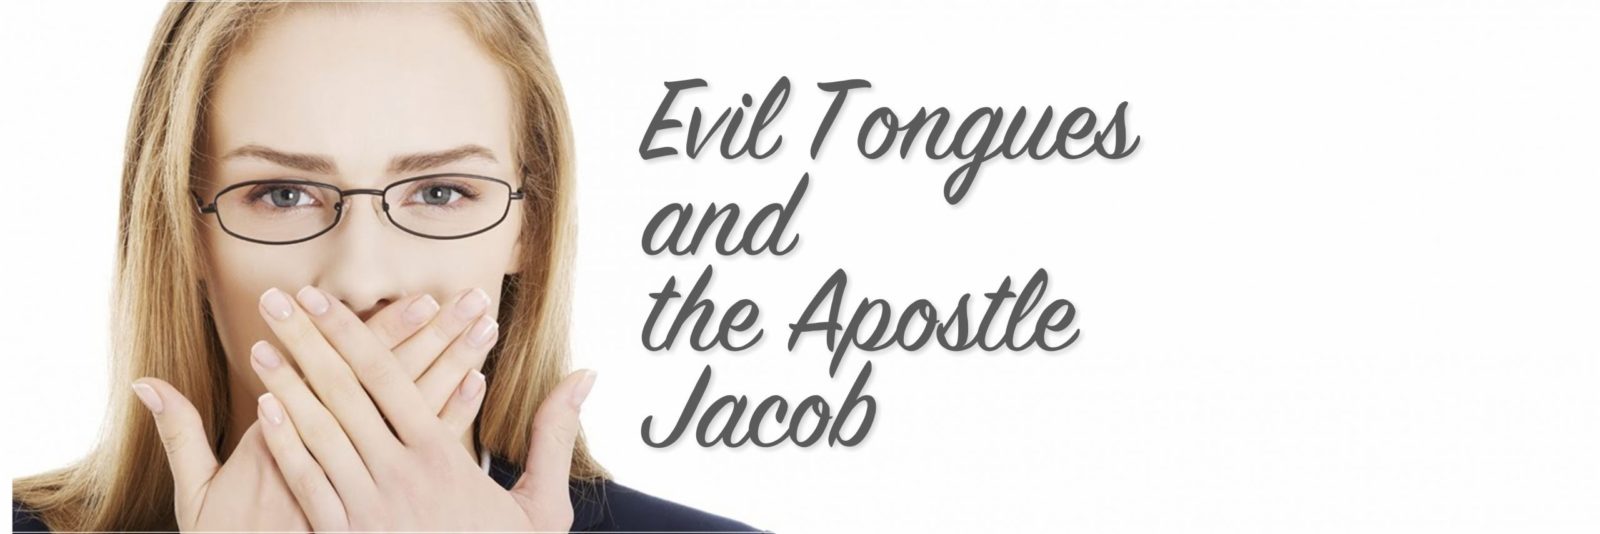 Evil Tongues and the Apostle Jacob (James)